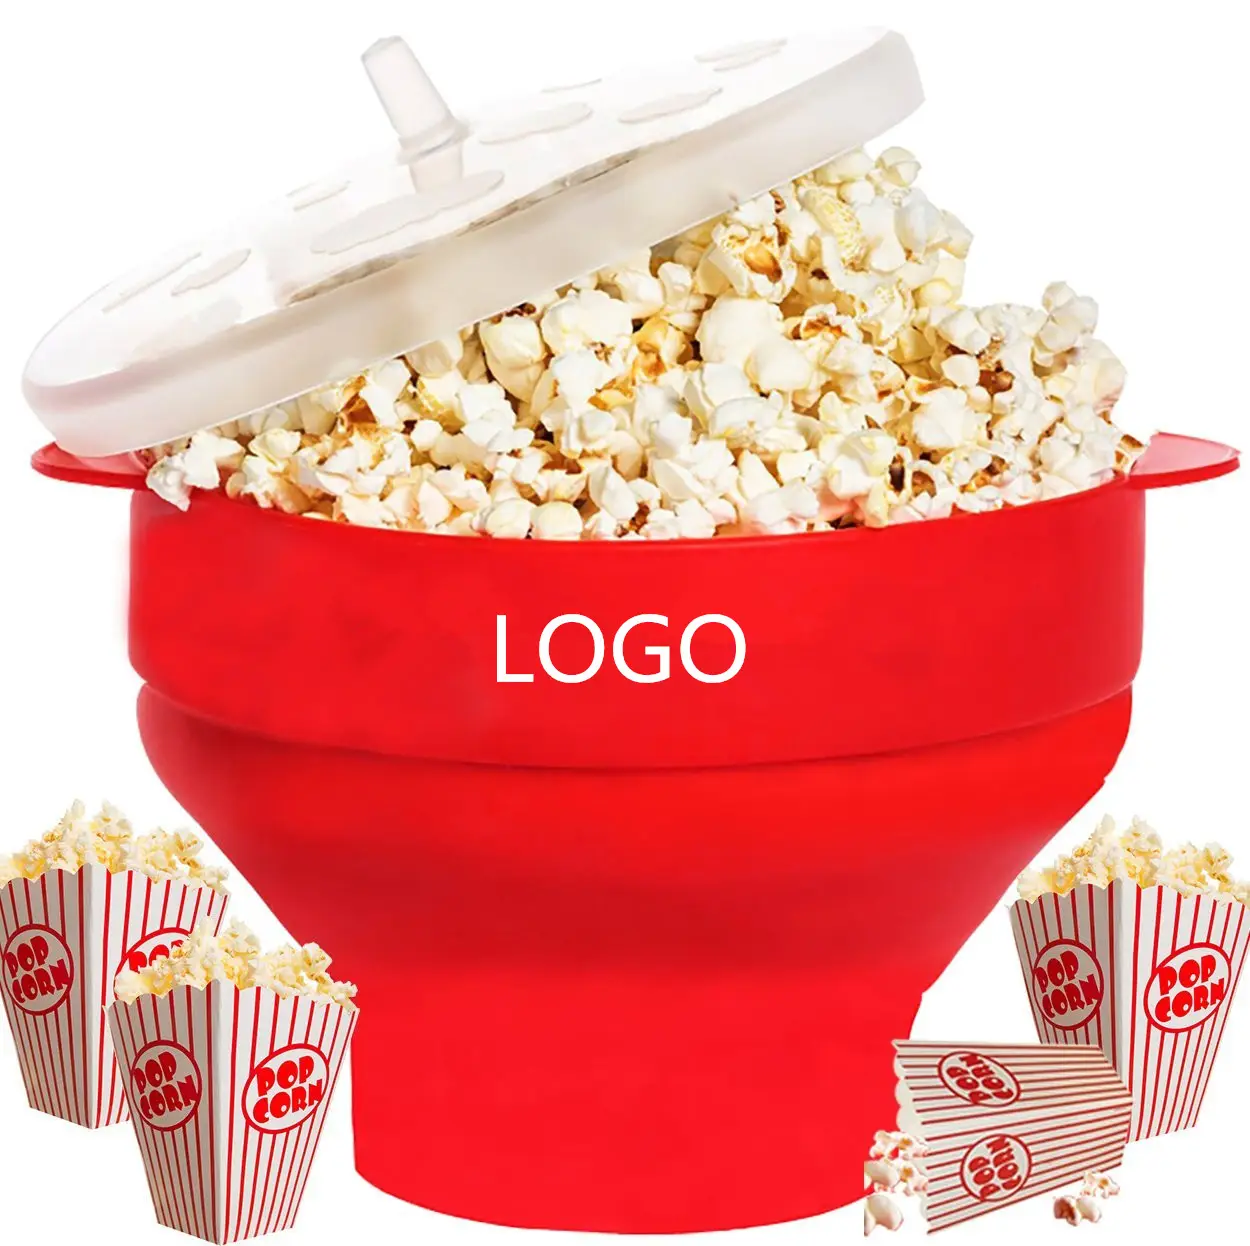 High Quality BPA FREE Microwave Collapsible Silicone Popcorn Popper Maker